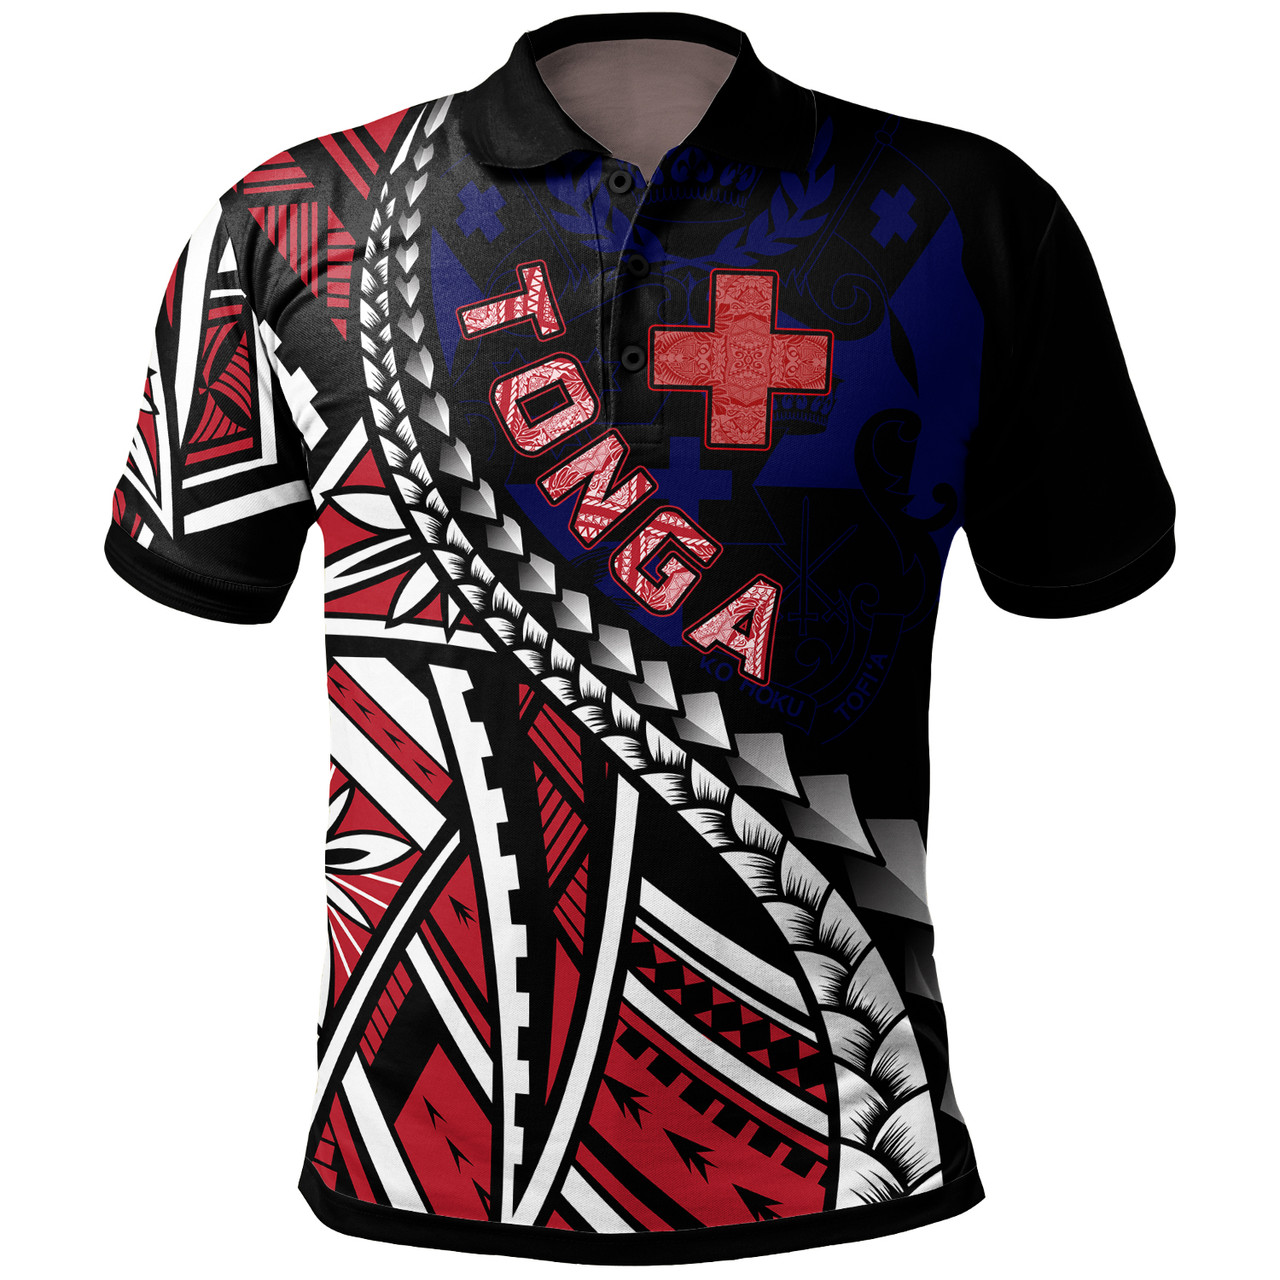 Tonga Polo Shirt - Tribals Flower Special Pattern